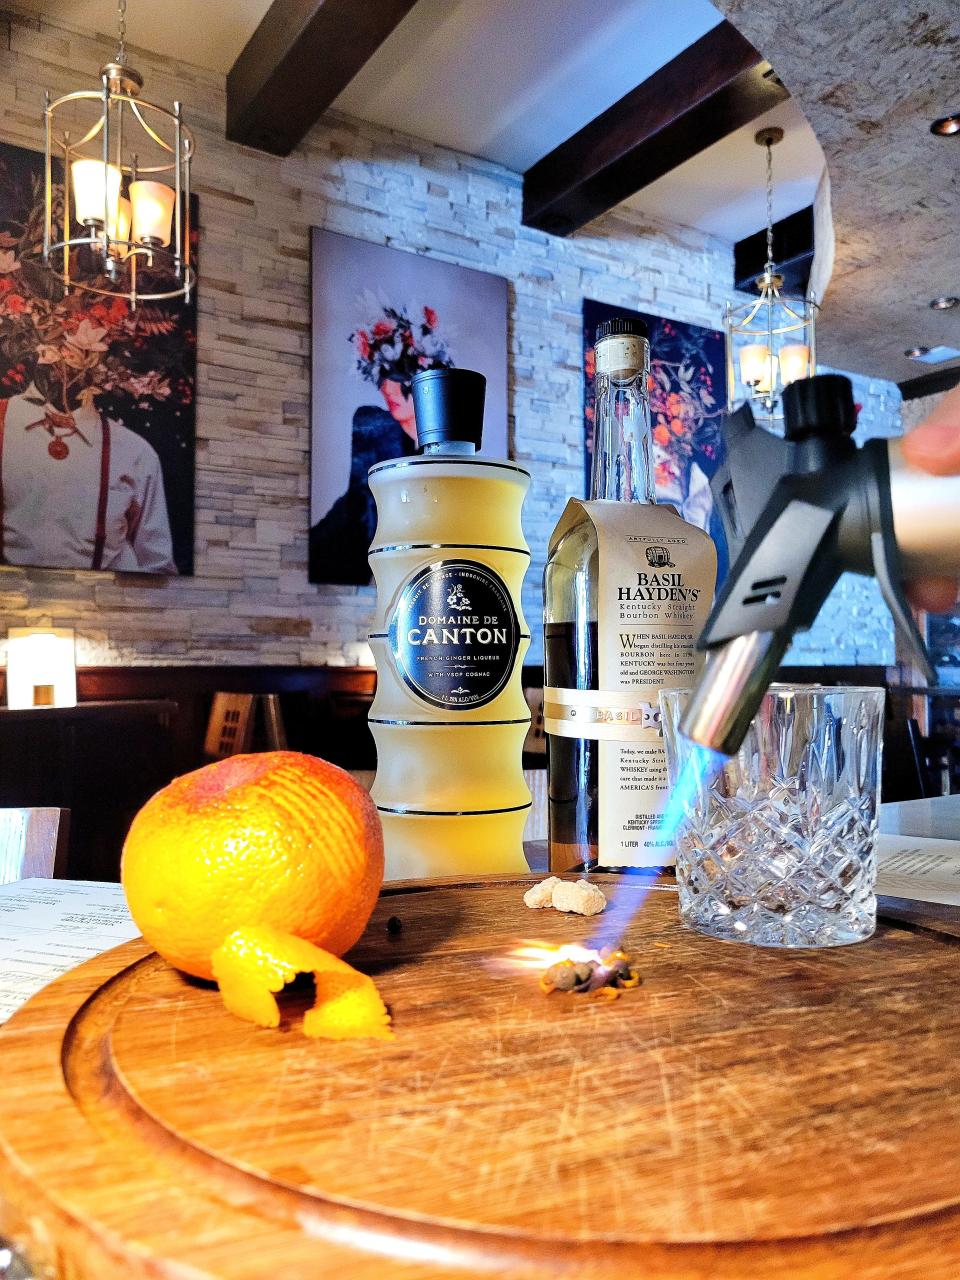 The Ginger Old Fashioned at The Raconteur in Pleasantville is made by torching a cube of turbinado sugar with clove, allspice and orange zest, creating a little smoke on the inside of the glass, before muddling the smoked sugar with orange bitters.